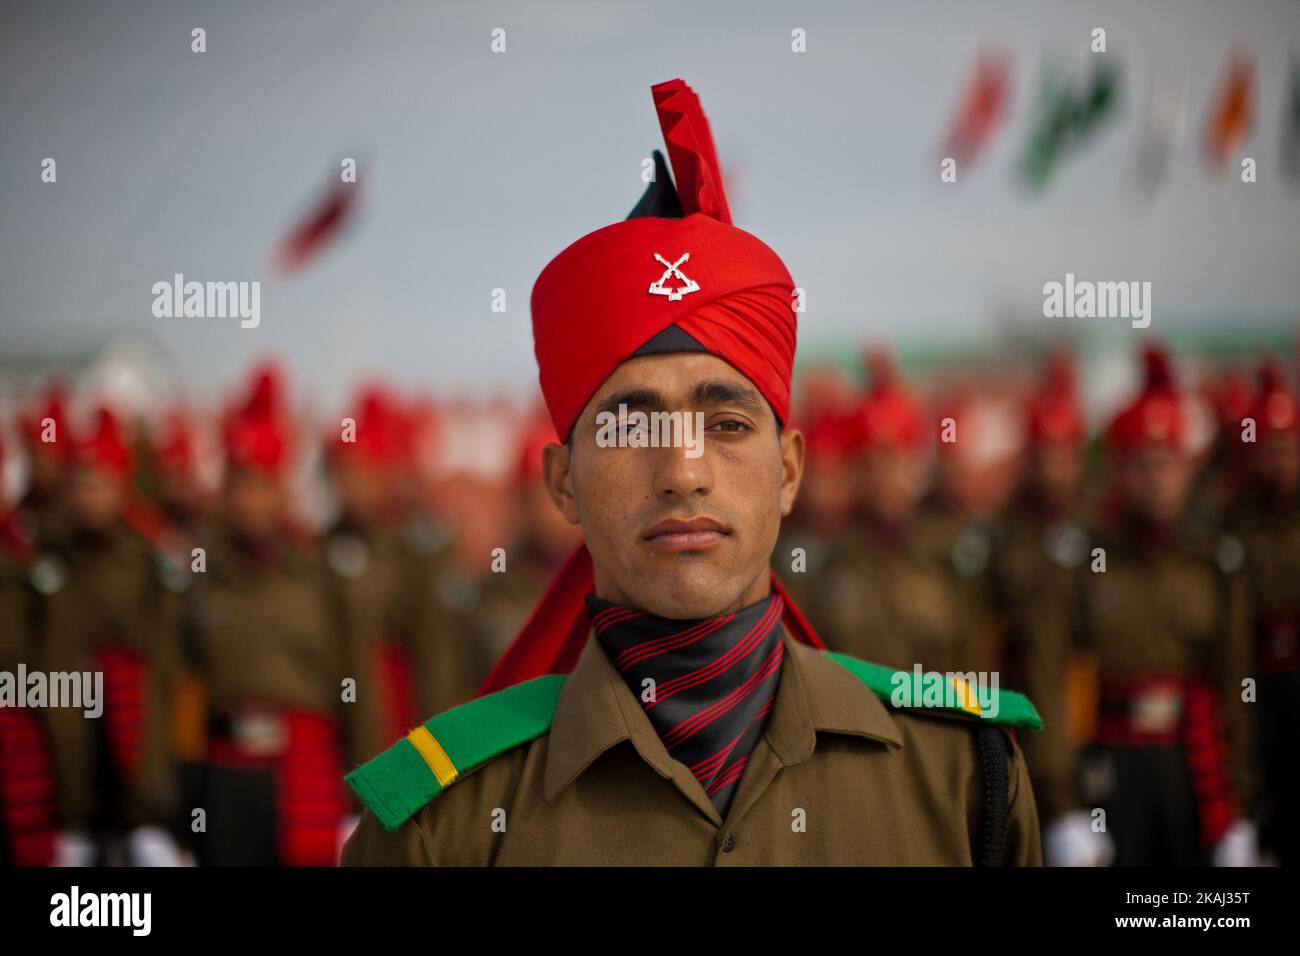 Recruits of the Indian army from Kashmir stamp their feet during their passing out parade at a garrison in Rangreth on March 05, 2016 in the outskirts of Srinagar, the summer capital of Indian-controlled Kashmir, India. Over 240 Kashmiri men took an oath during their passing out parade after successfully completing 49 weeks of arduous training which involved, weapons handling, map reading and counter-insurgency operations. The recruits will join Indian army's Jammu and Kashmir Light Infantry Regiment (JAK LI) to fight militants in Kashmir, a spokesman of the army said. India has already close  Stock Photo